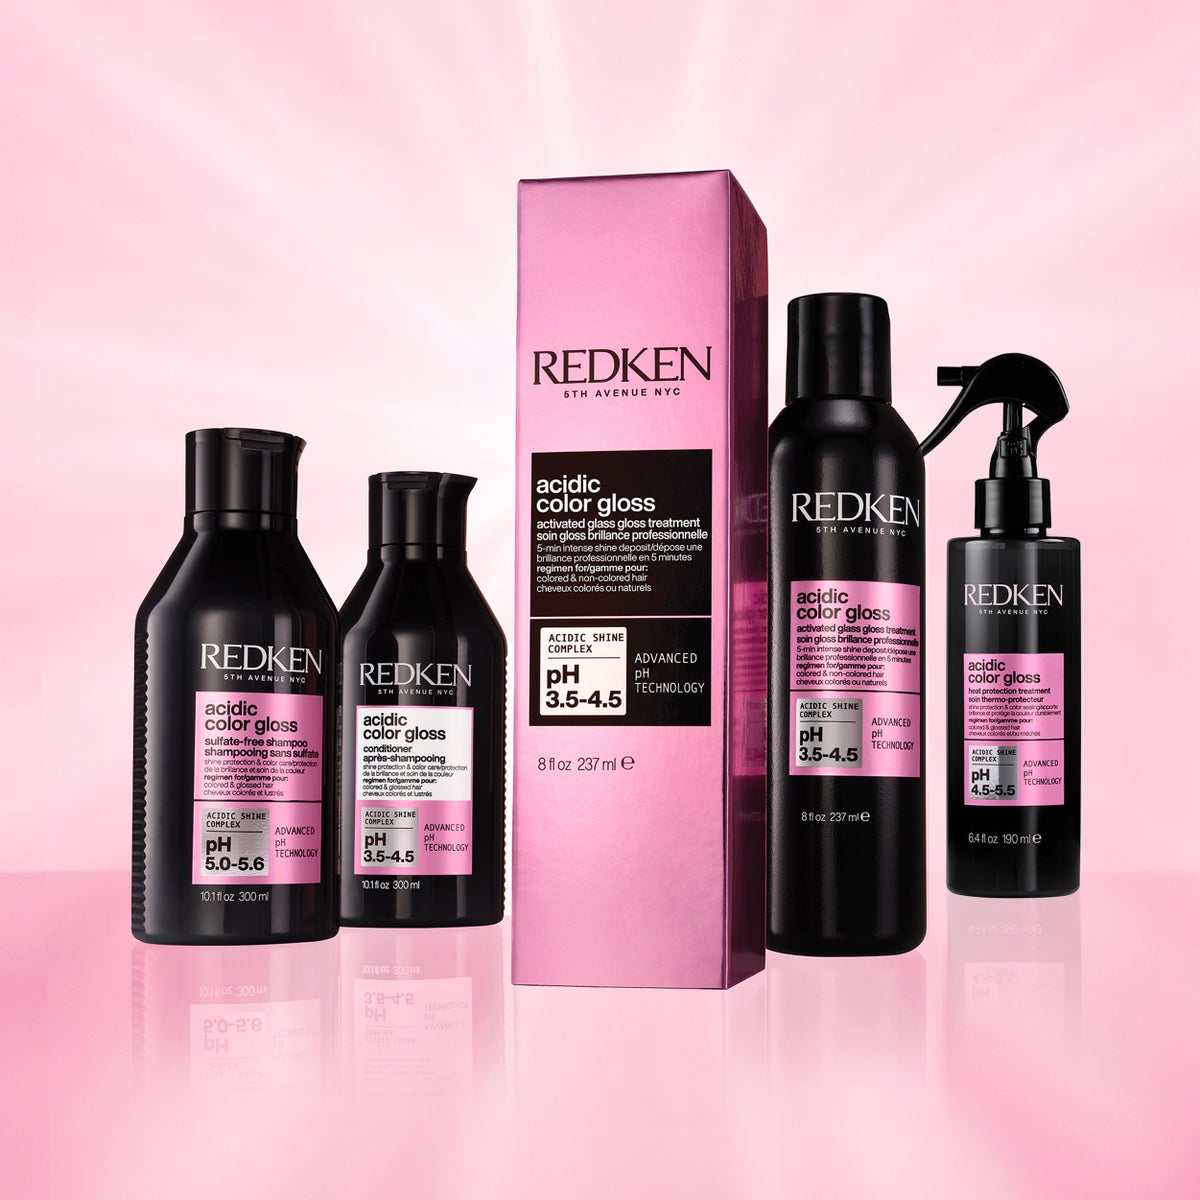 NEW FROM REDKEN